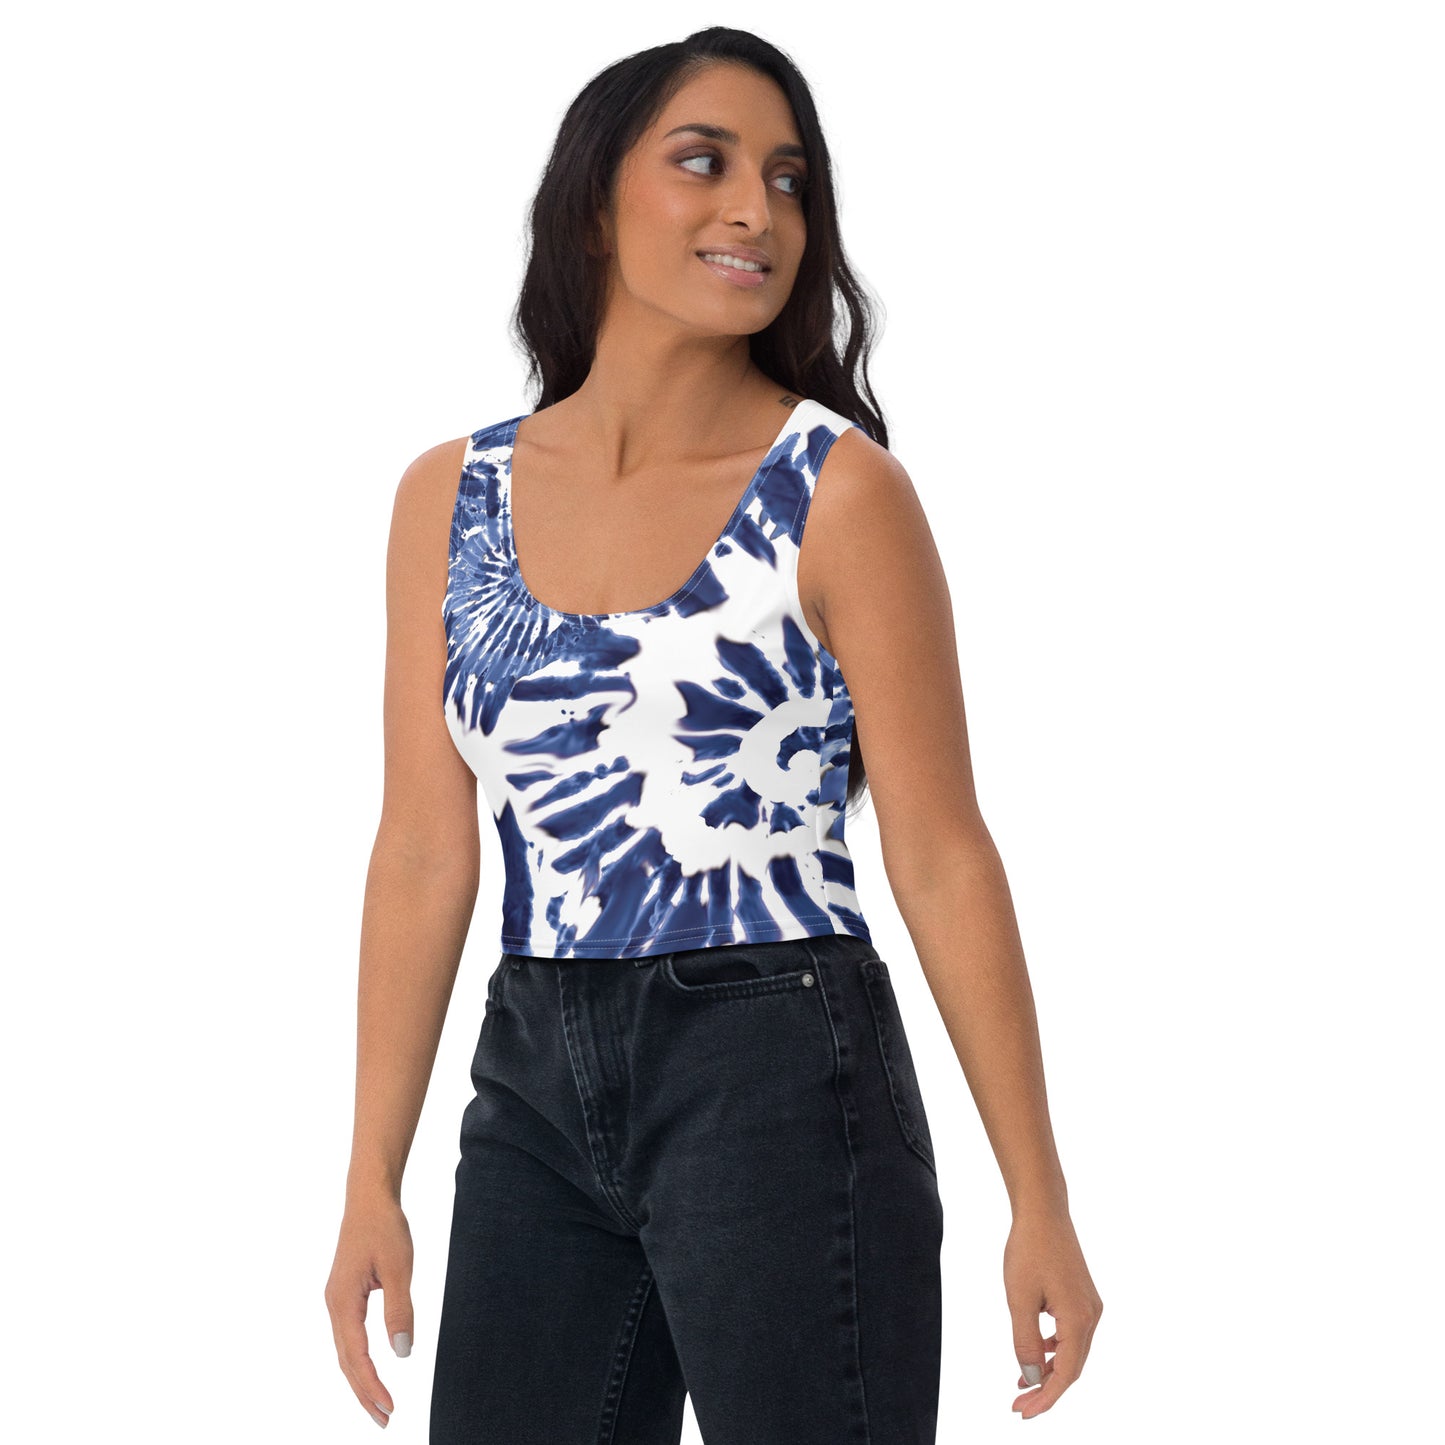 Women's, Teen's Crop Top Blue and White